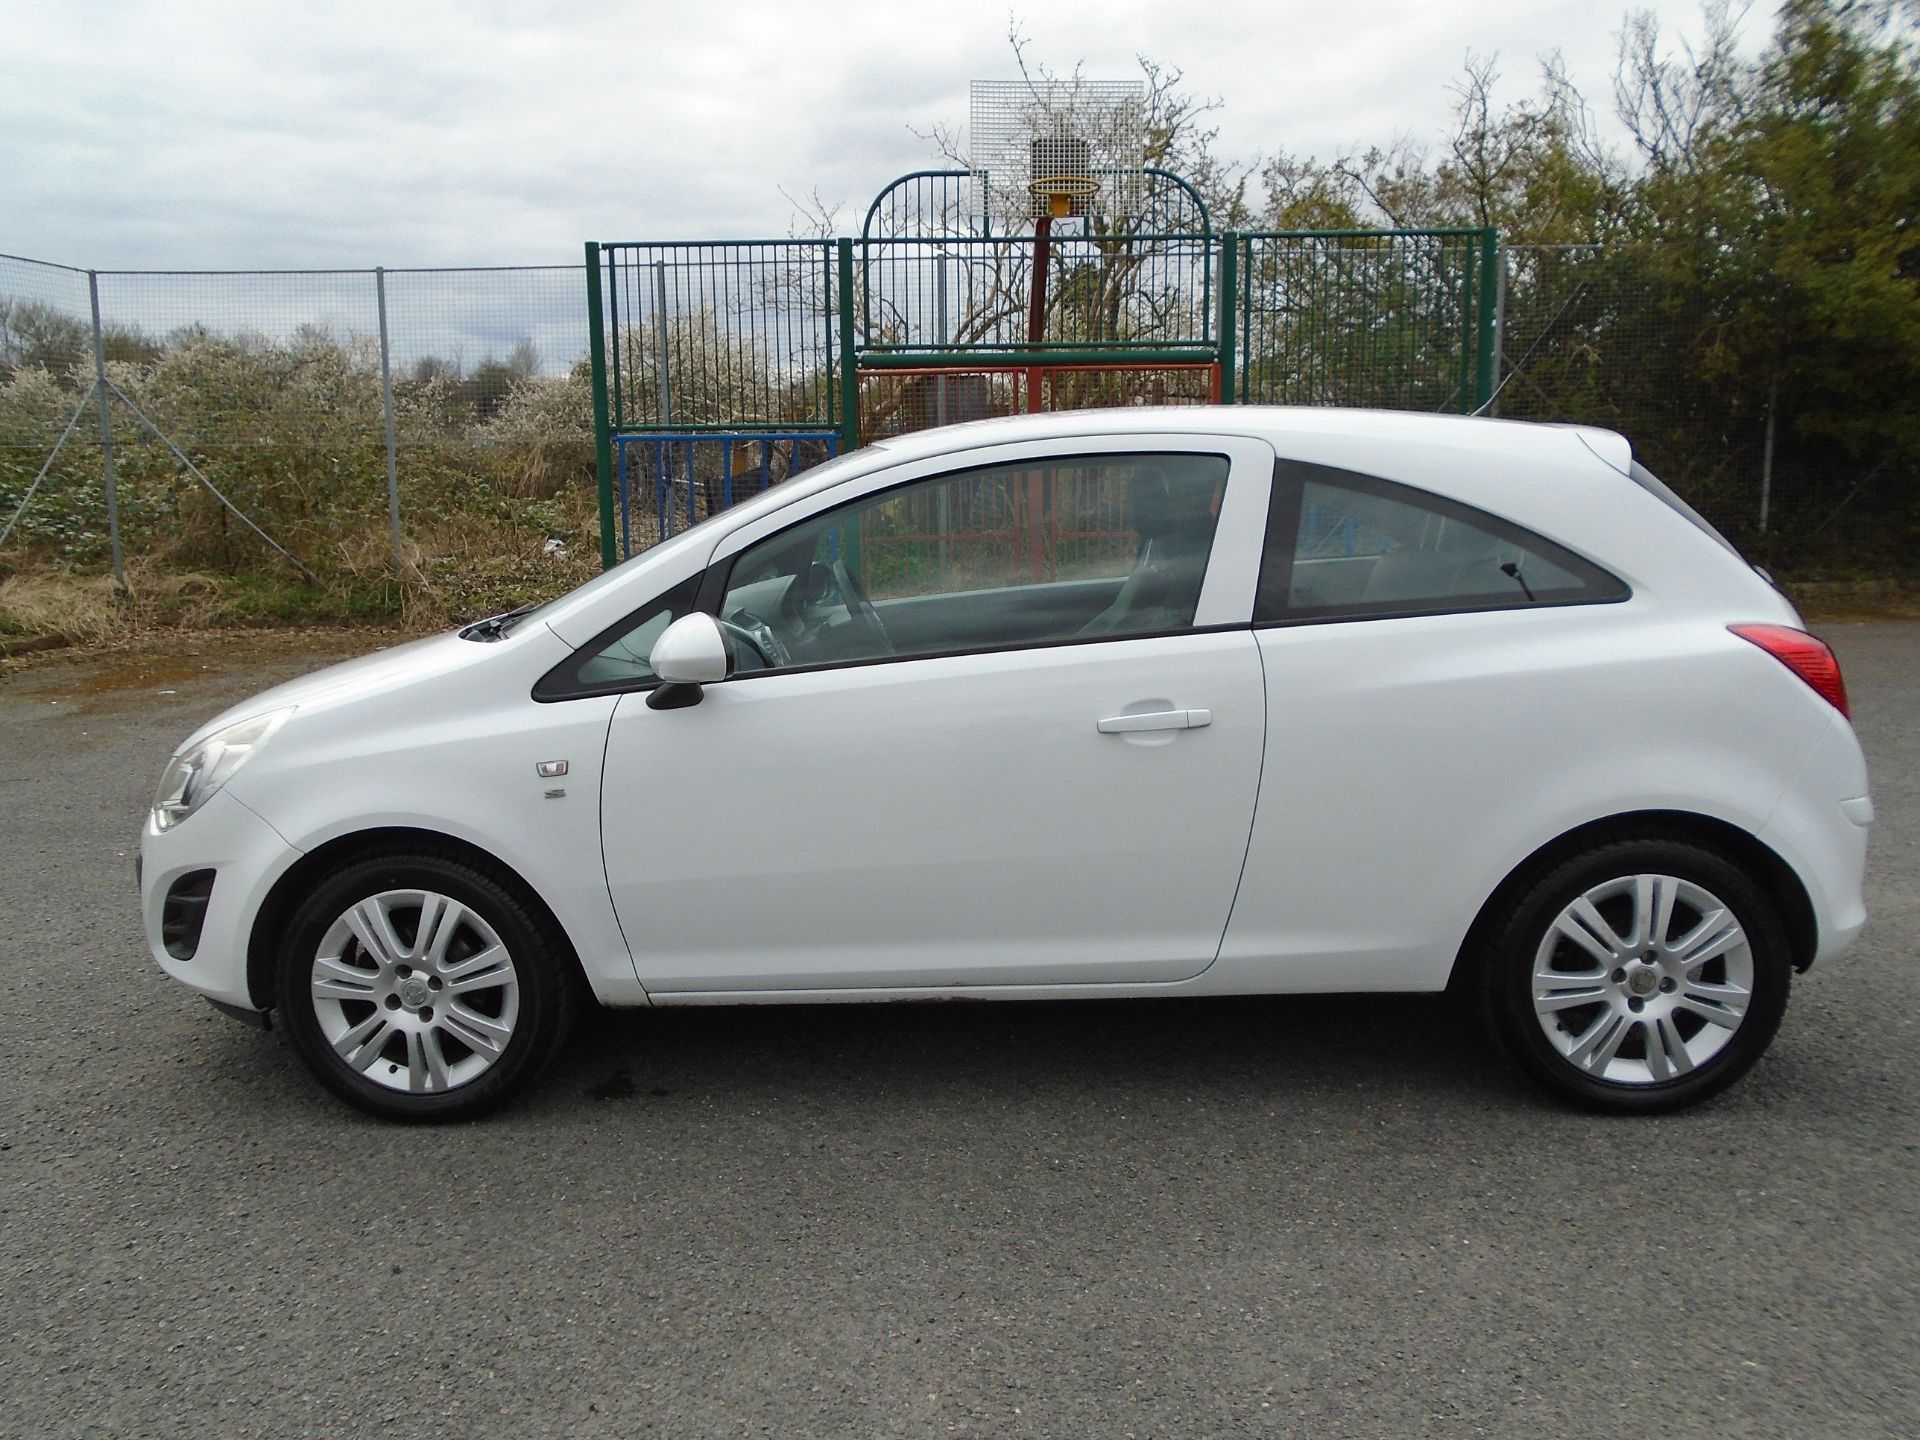 2011/61 REG VAUXHALL CORSA S ECOFLEX 998CC PETROL WHITE 3DR HATCHBACK, SHOWING 3 FORMER KEEPERS - Image 4 of 8